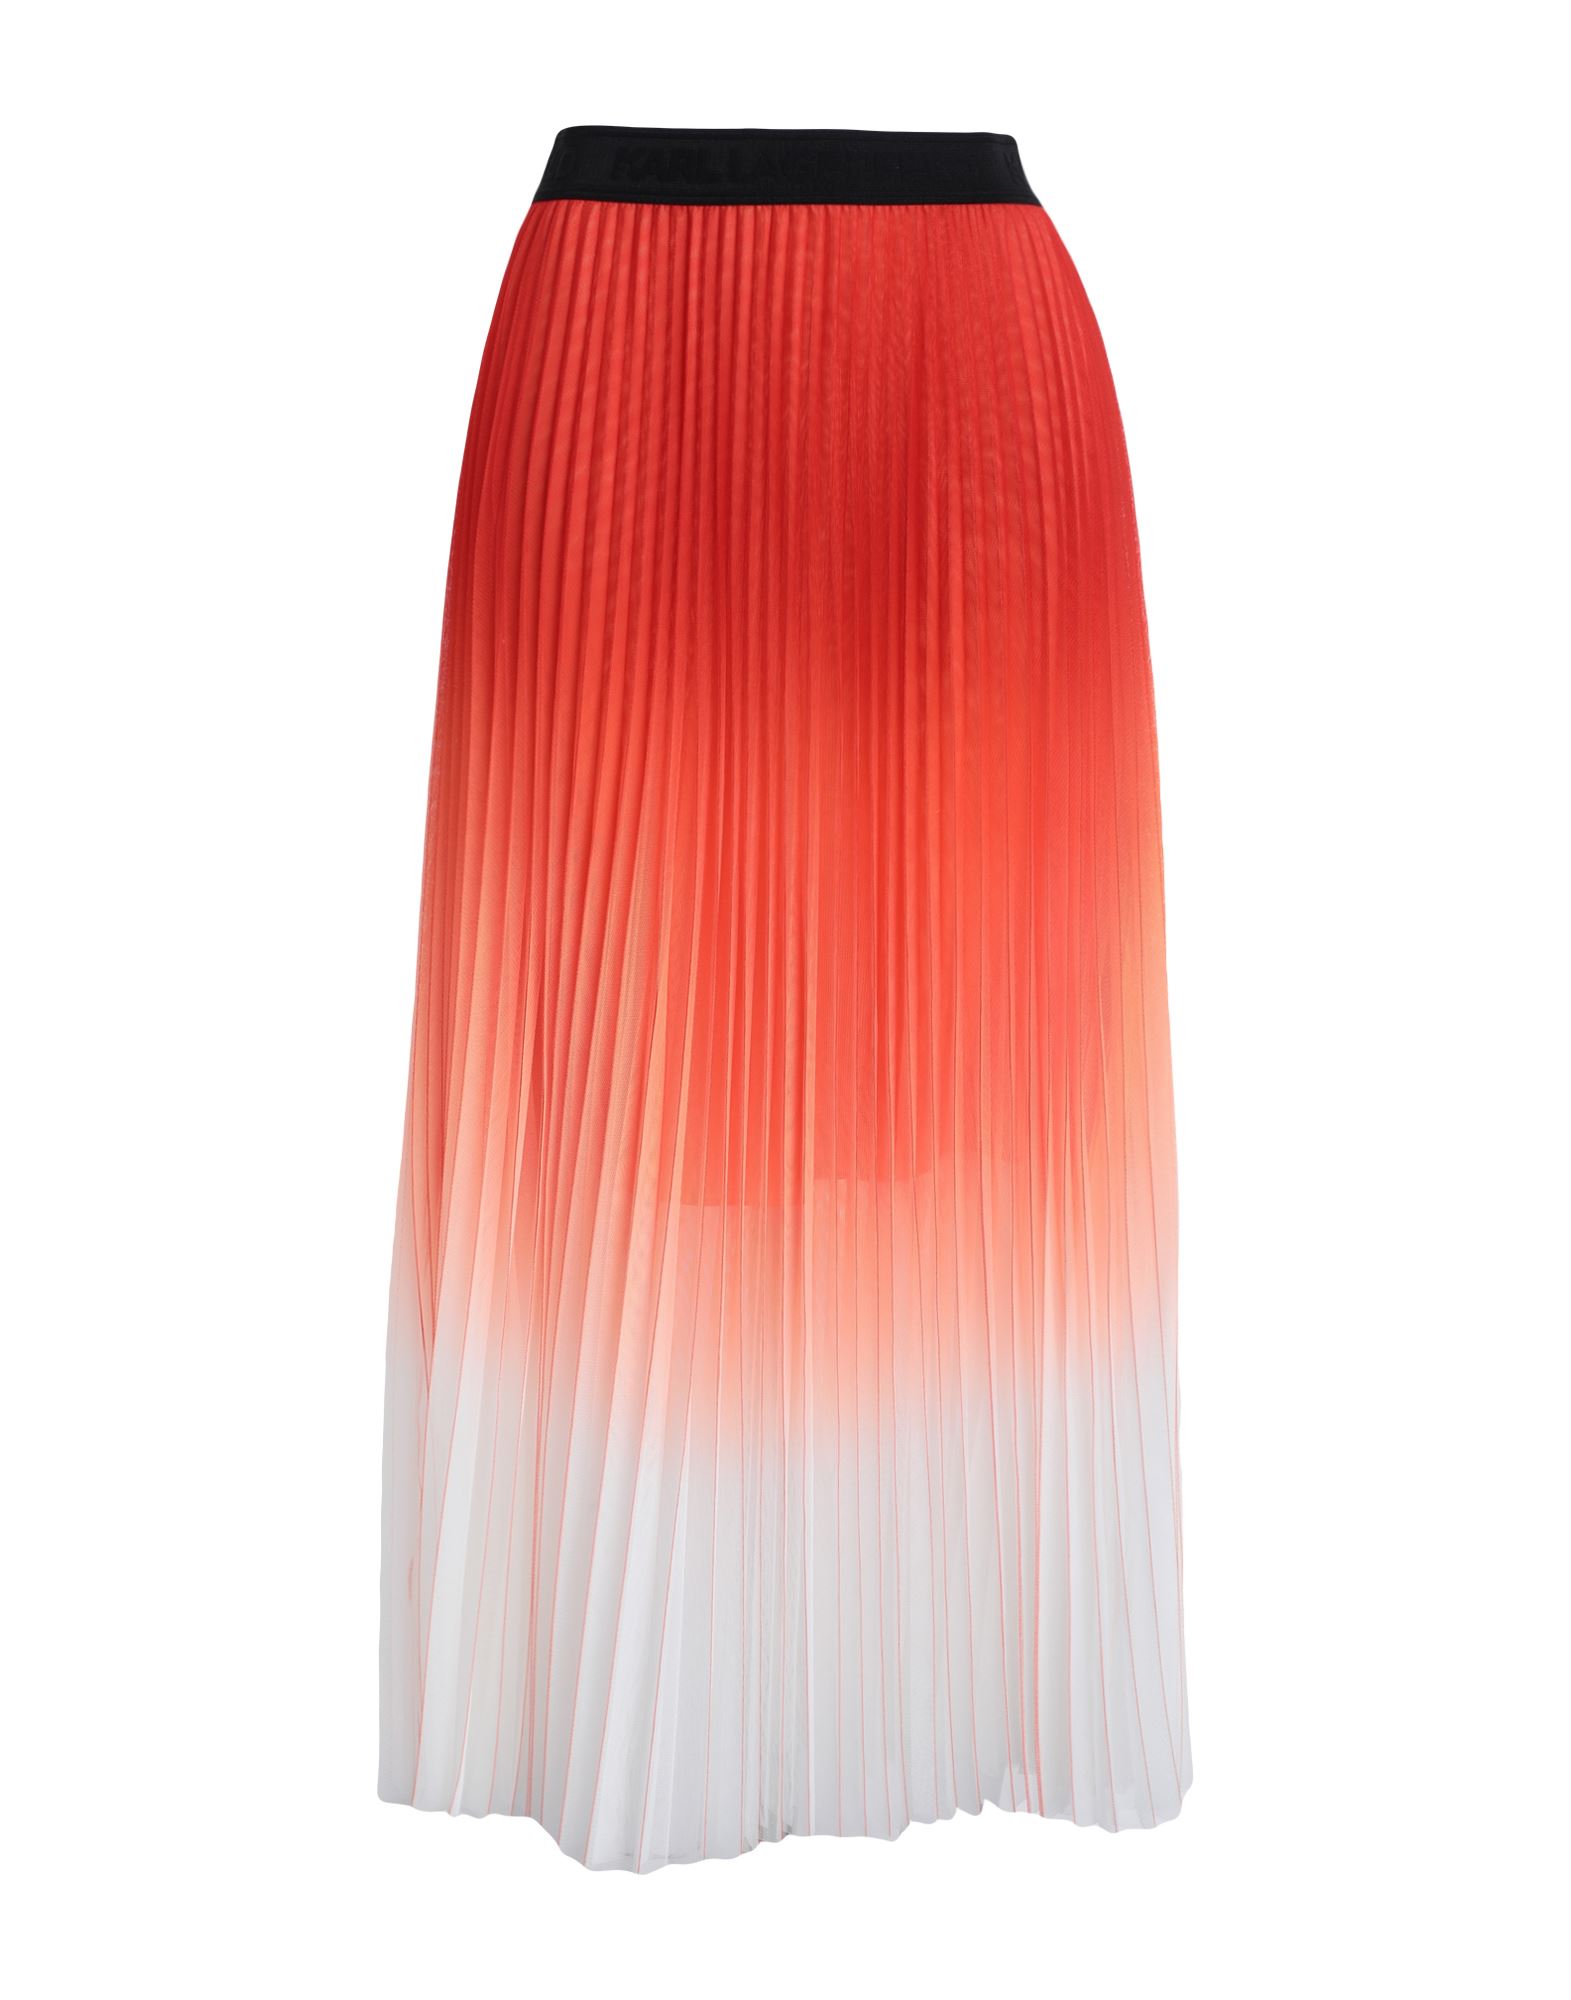 KARL LAGERFELD KARL LAGERFELD PLEATED MESH OMBRE SKIRT WOMAN LONG SKIRT TOMATO RED SIZE 4 POLYESTER